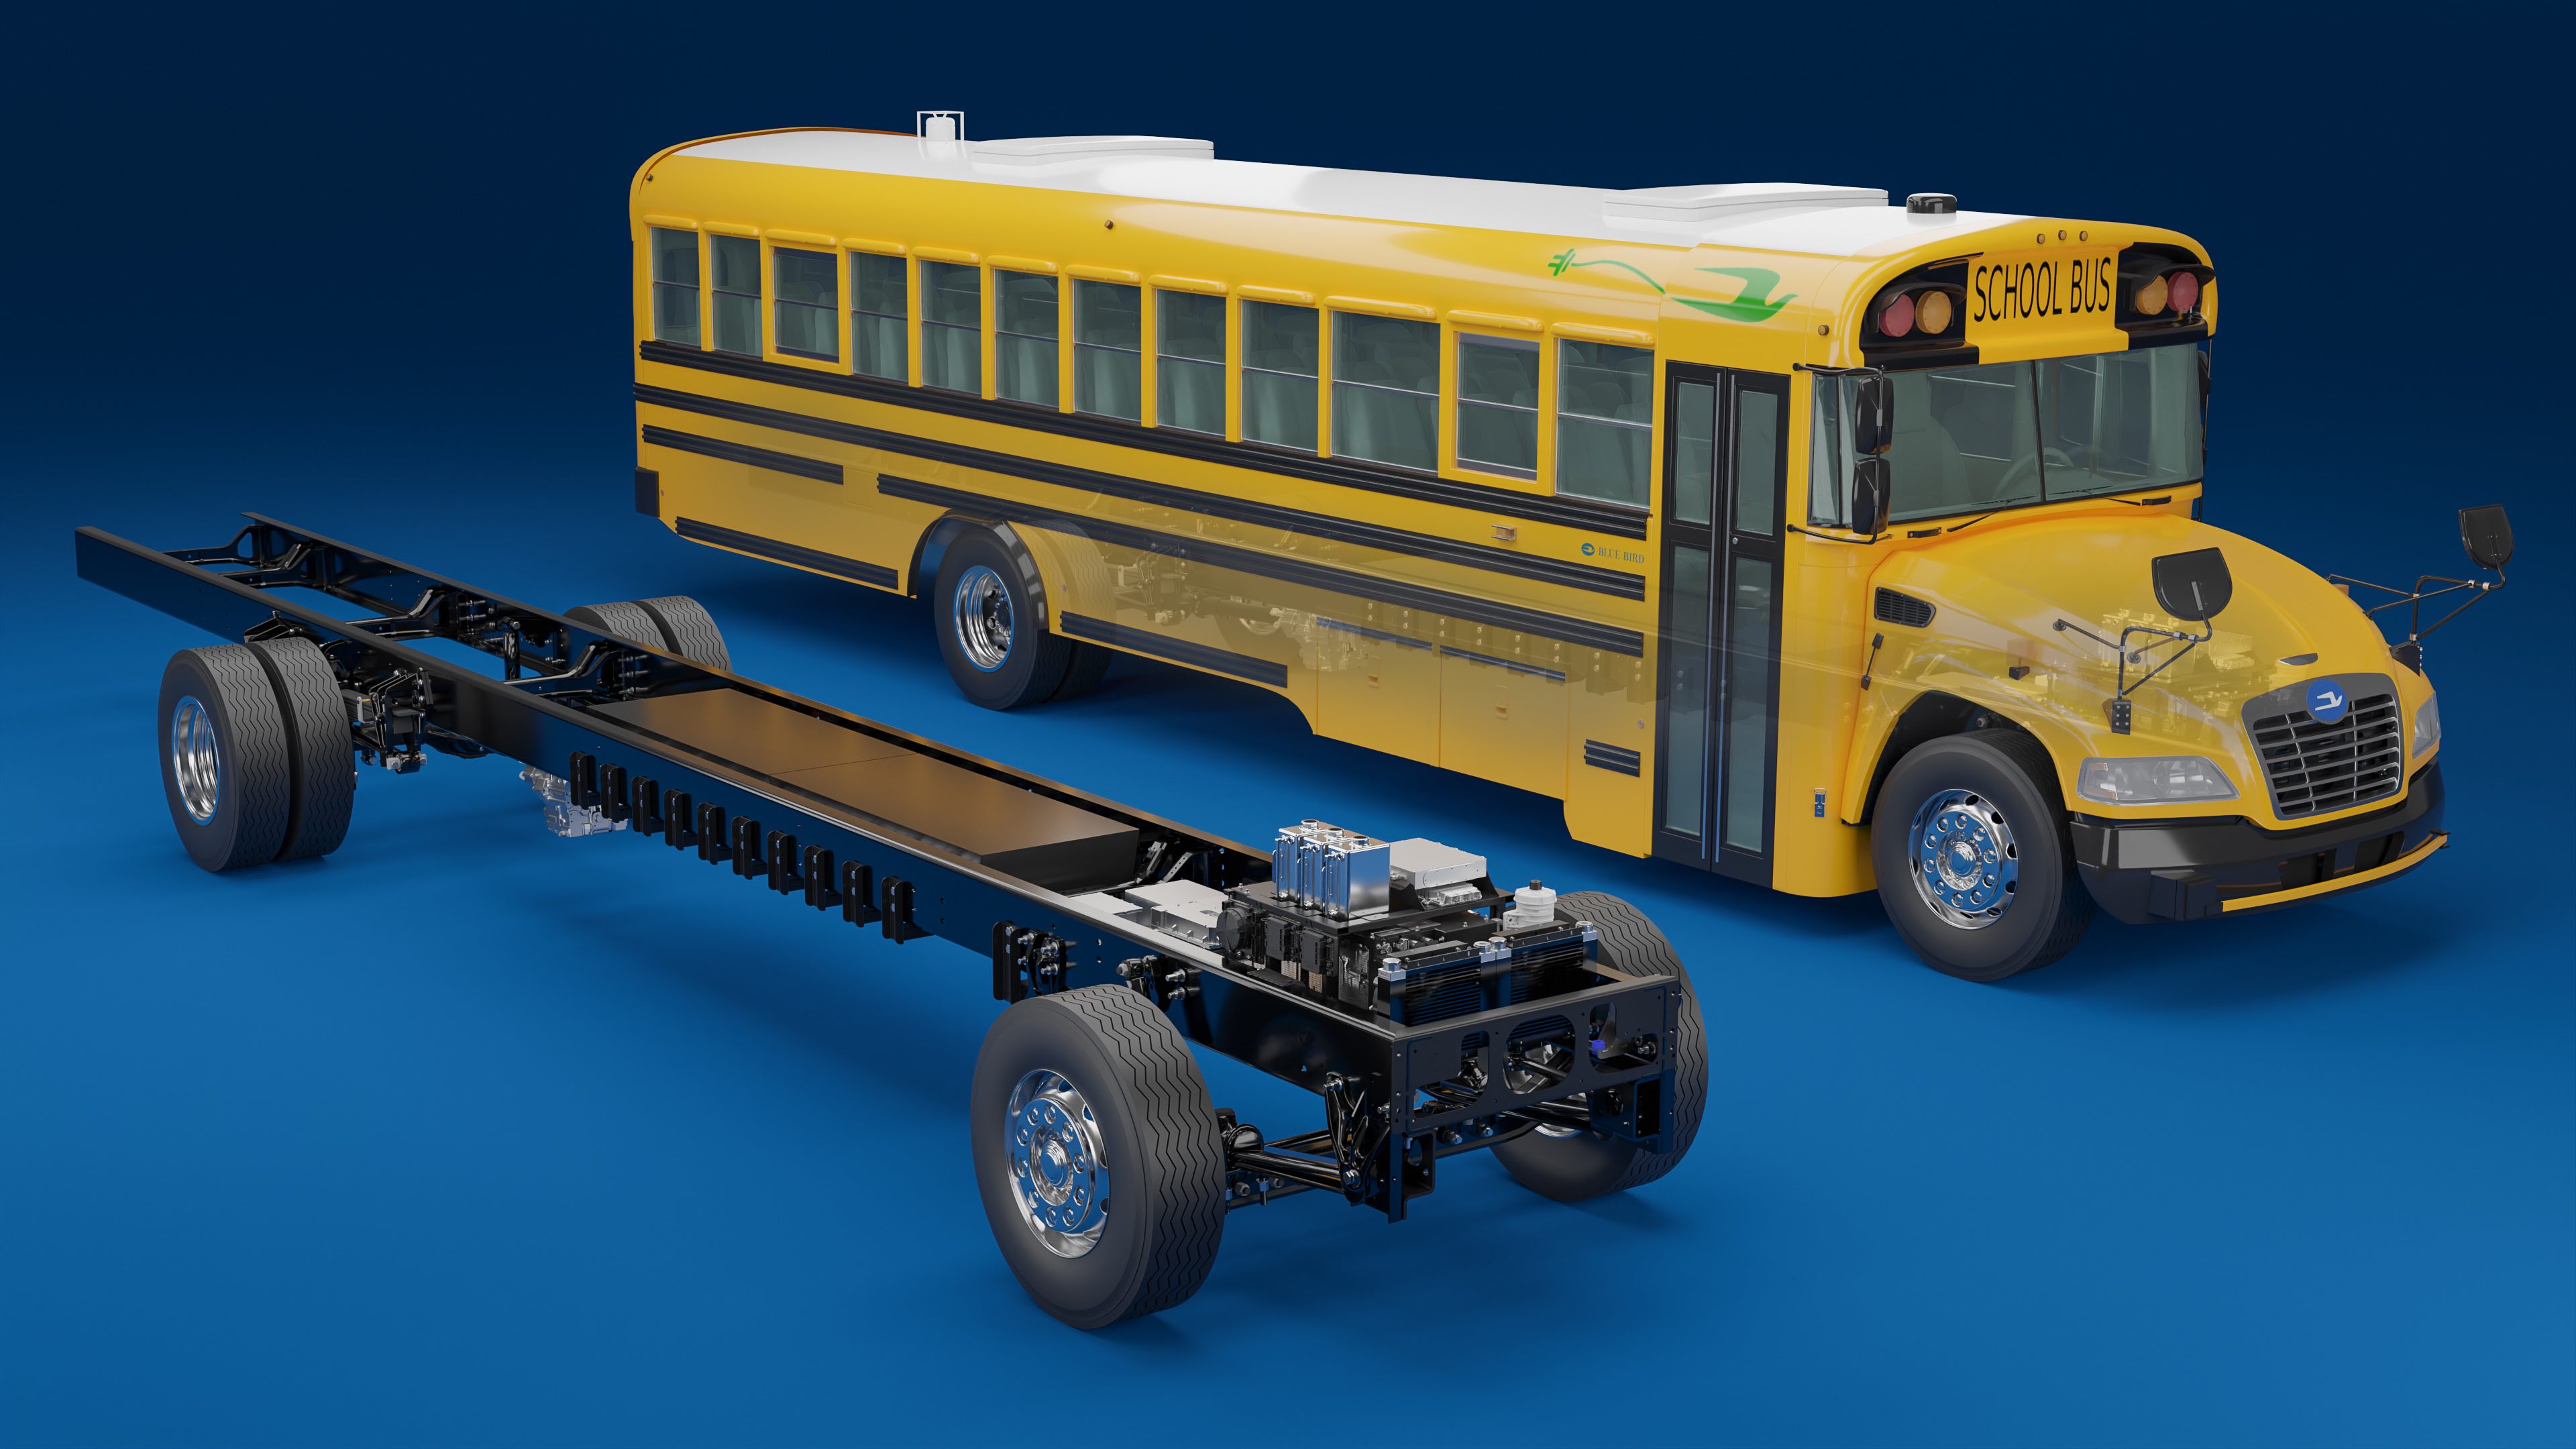 Blue Bird to Offer Electric Repower Option for Gasoline and Propane Powered School Buses